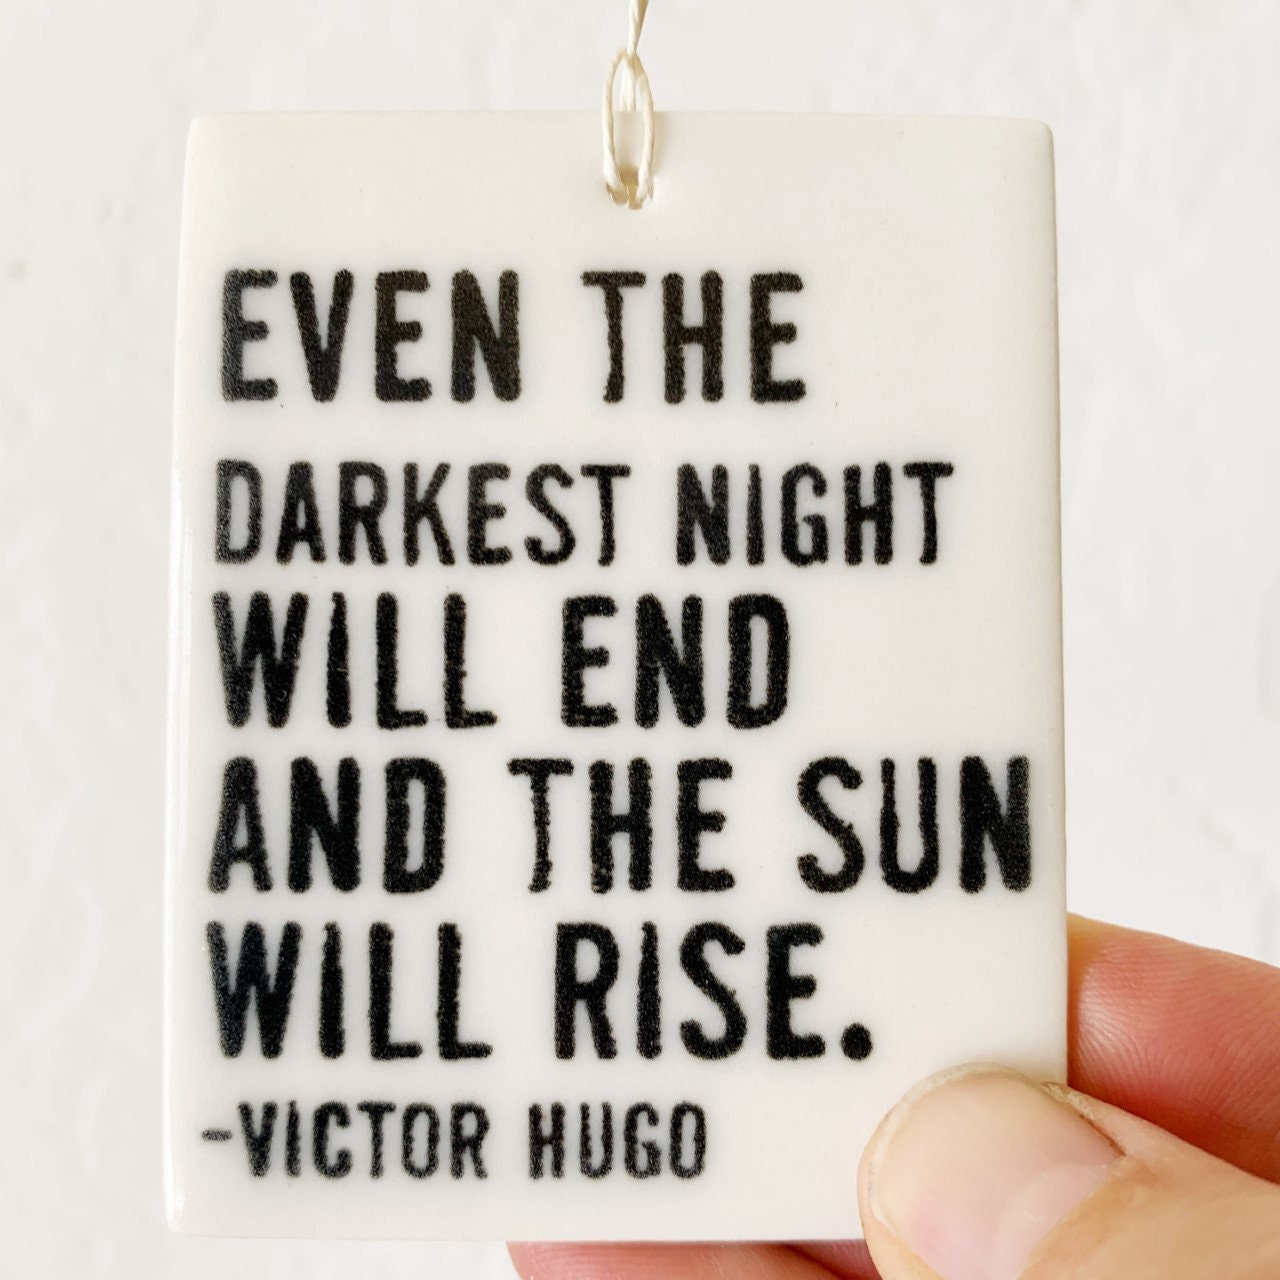 victor hugo | ceramic wall tag | ceramic wall art | meaningful gift | hope quote | bereavement | grief | loss